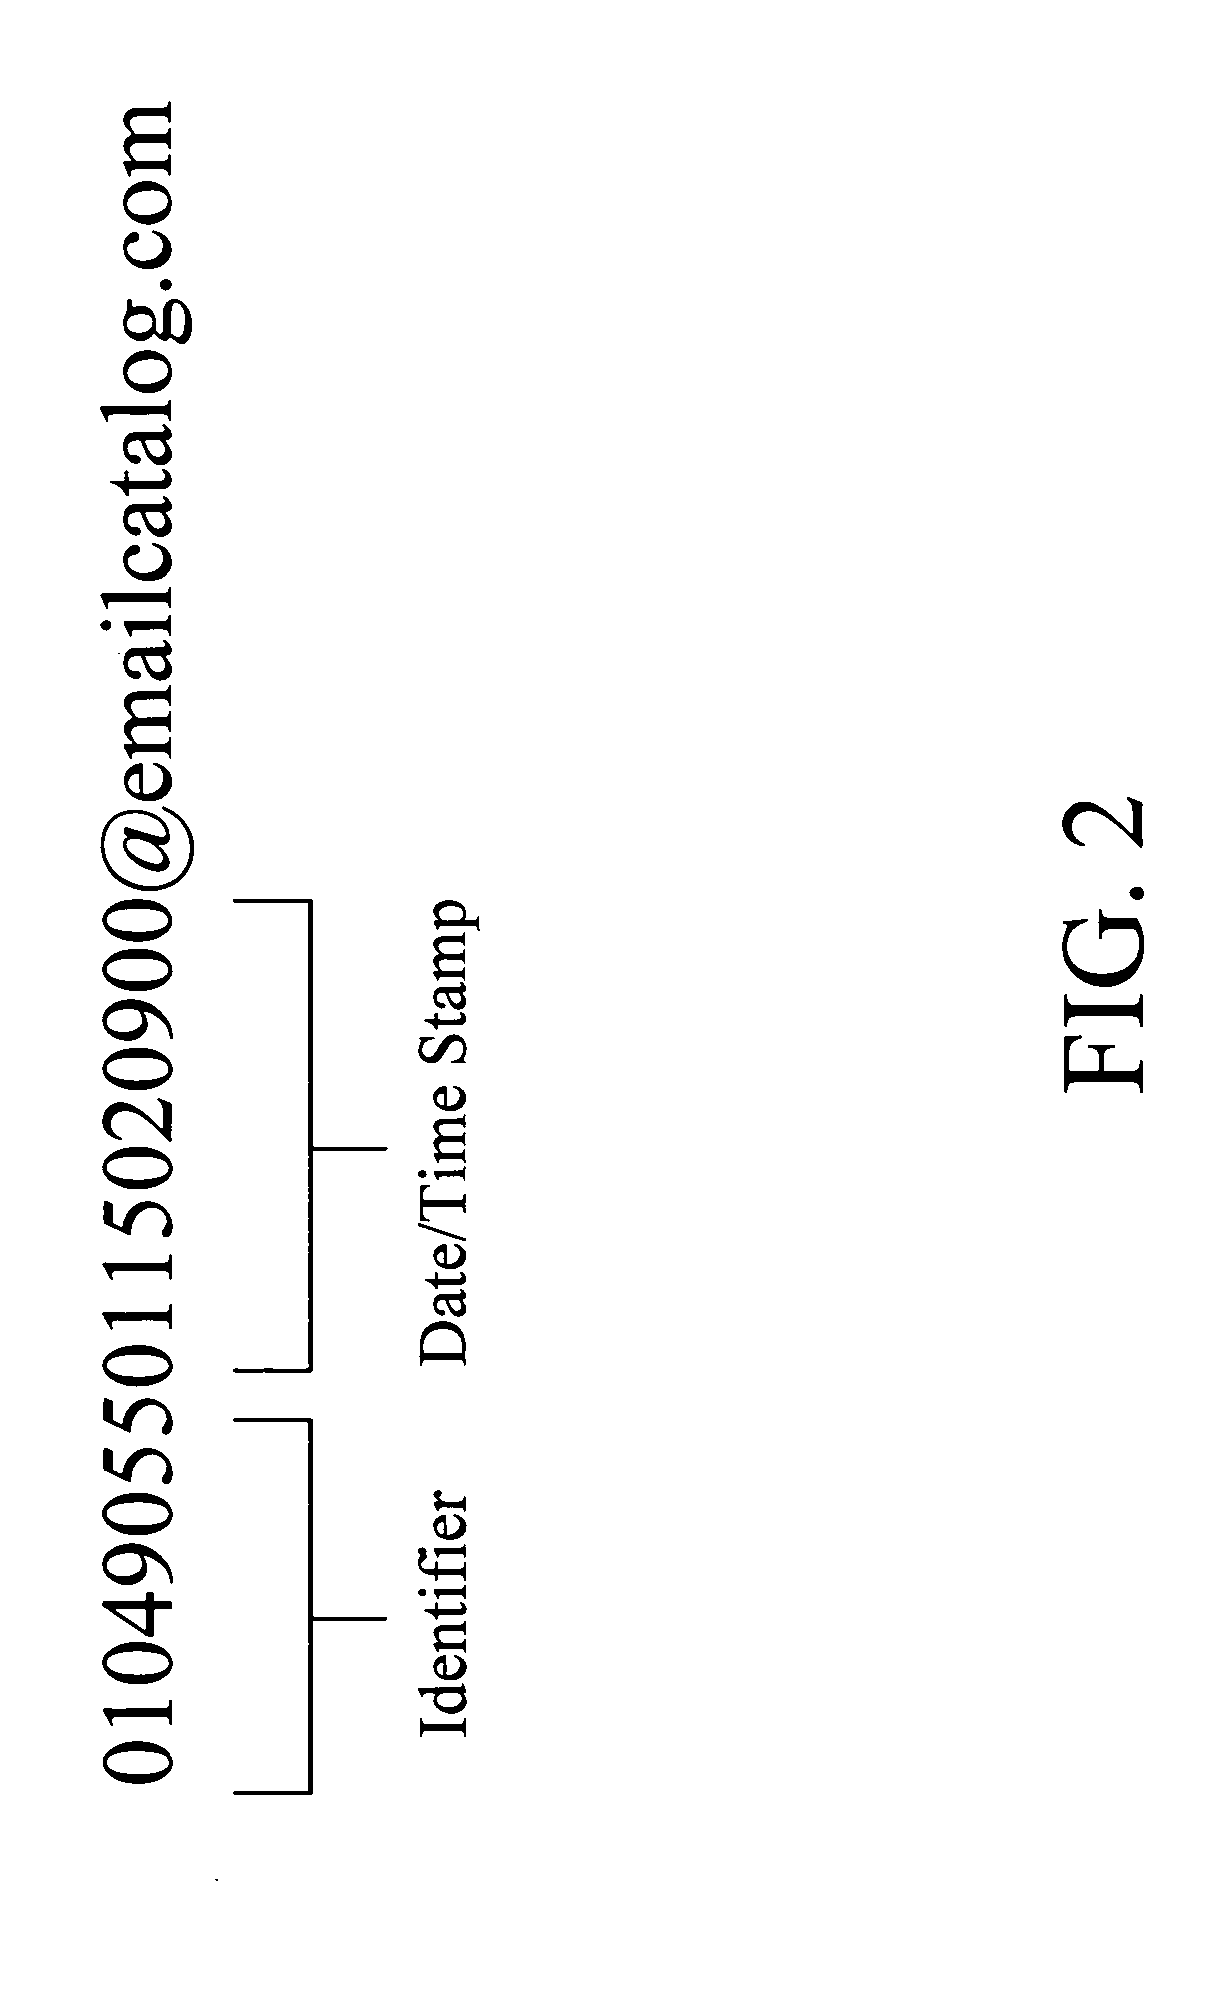 Dynamic online email catalog and trust relationship management system and method